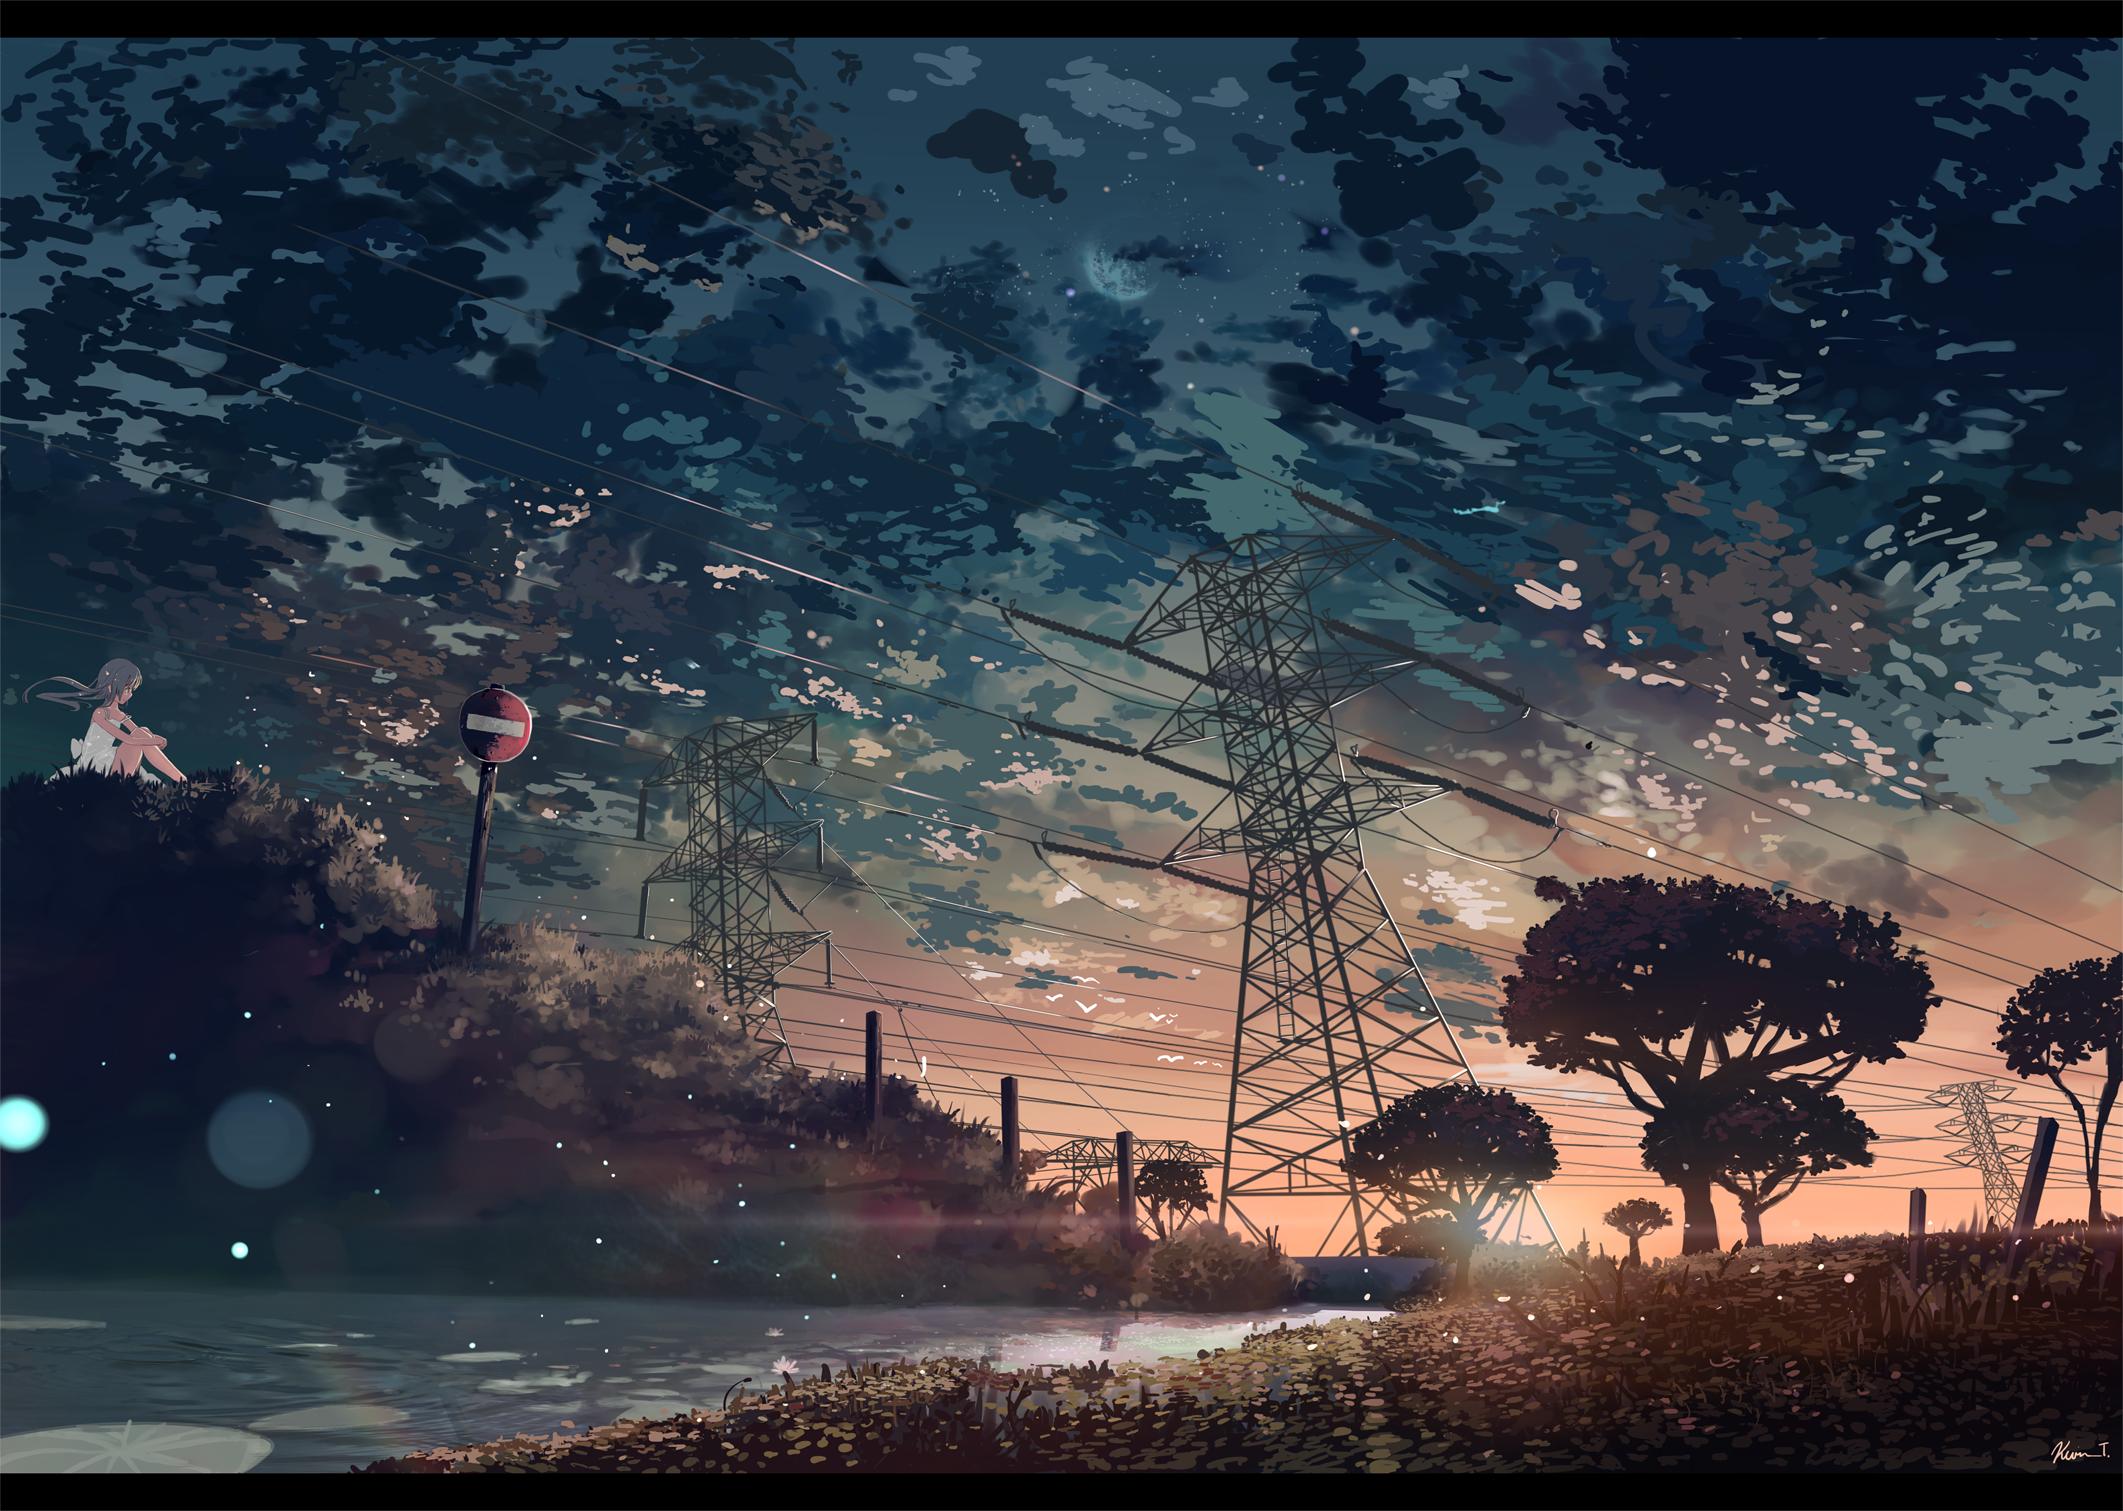 140+ Anime Landscape HD Wallpapers and Backgrounds